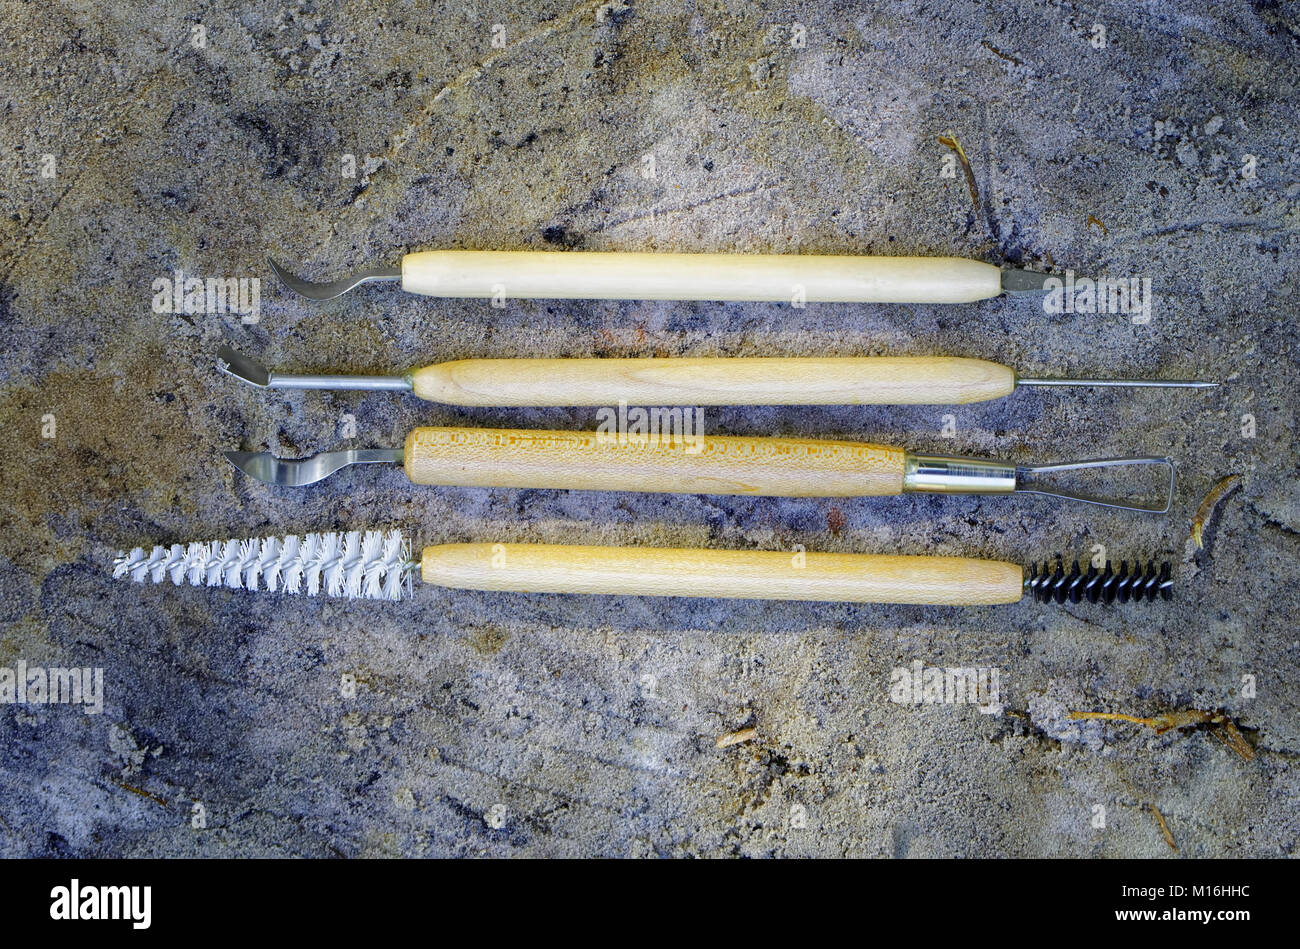 Tools for qualitative cleaning of finds in archeology, paleontology and geology Stock Photo